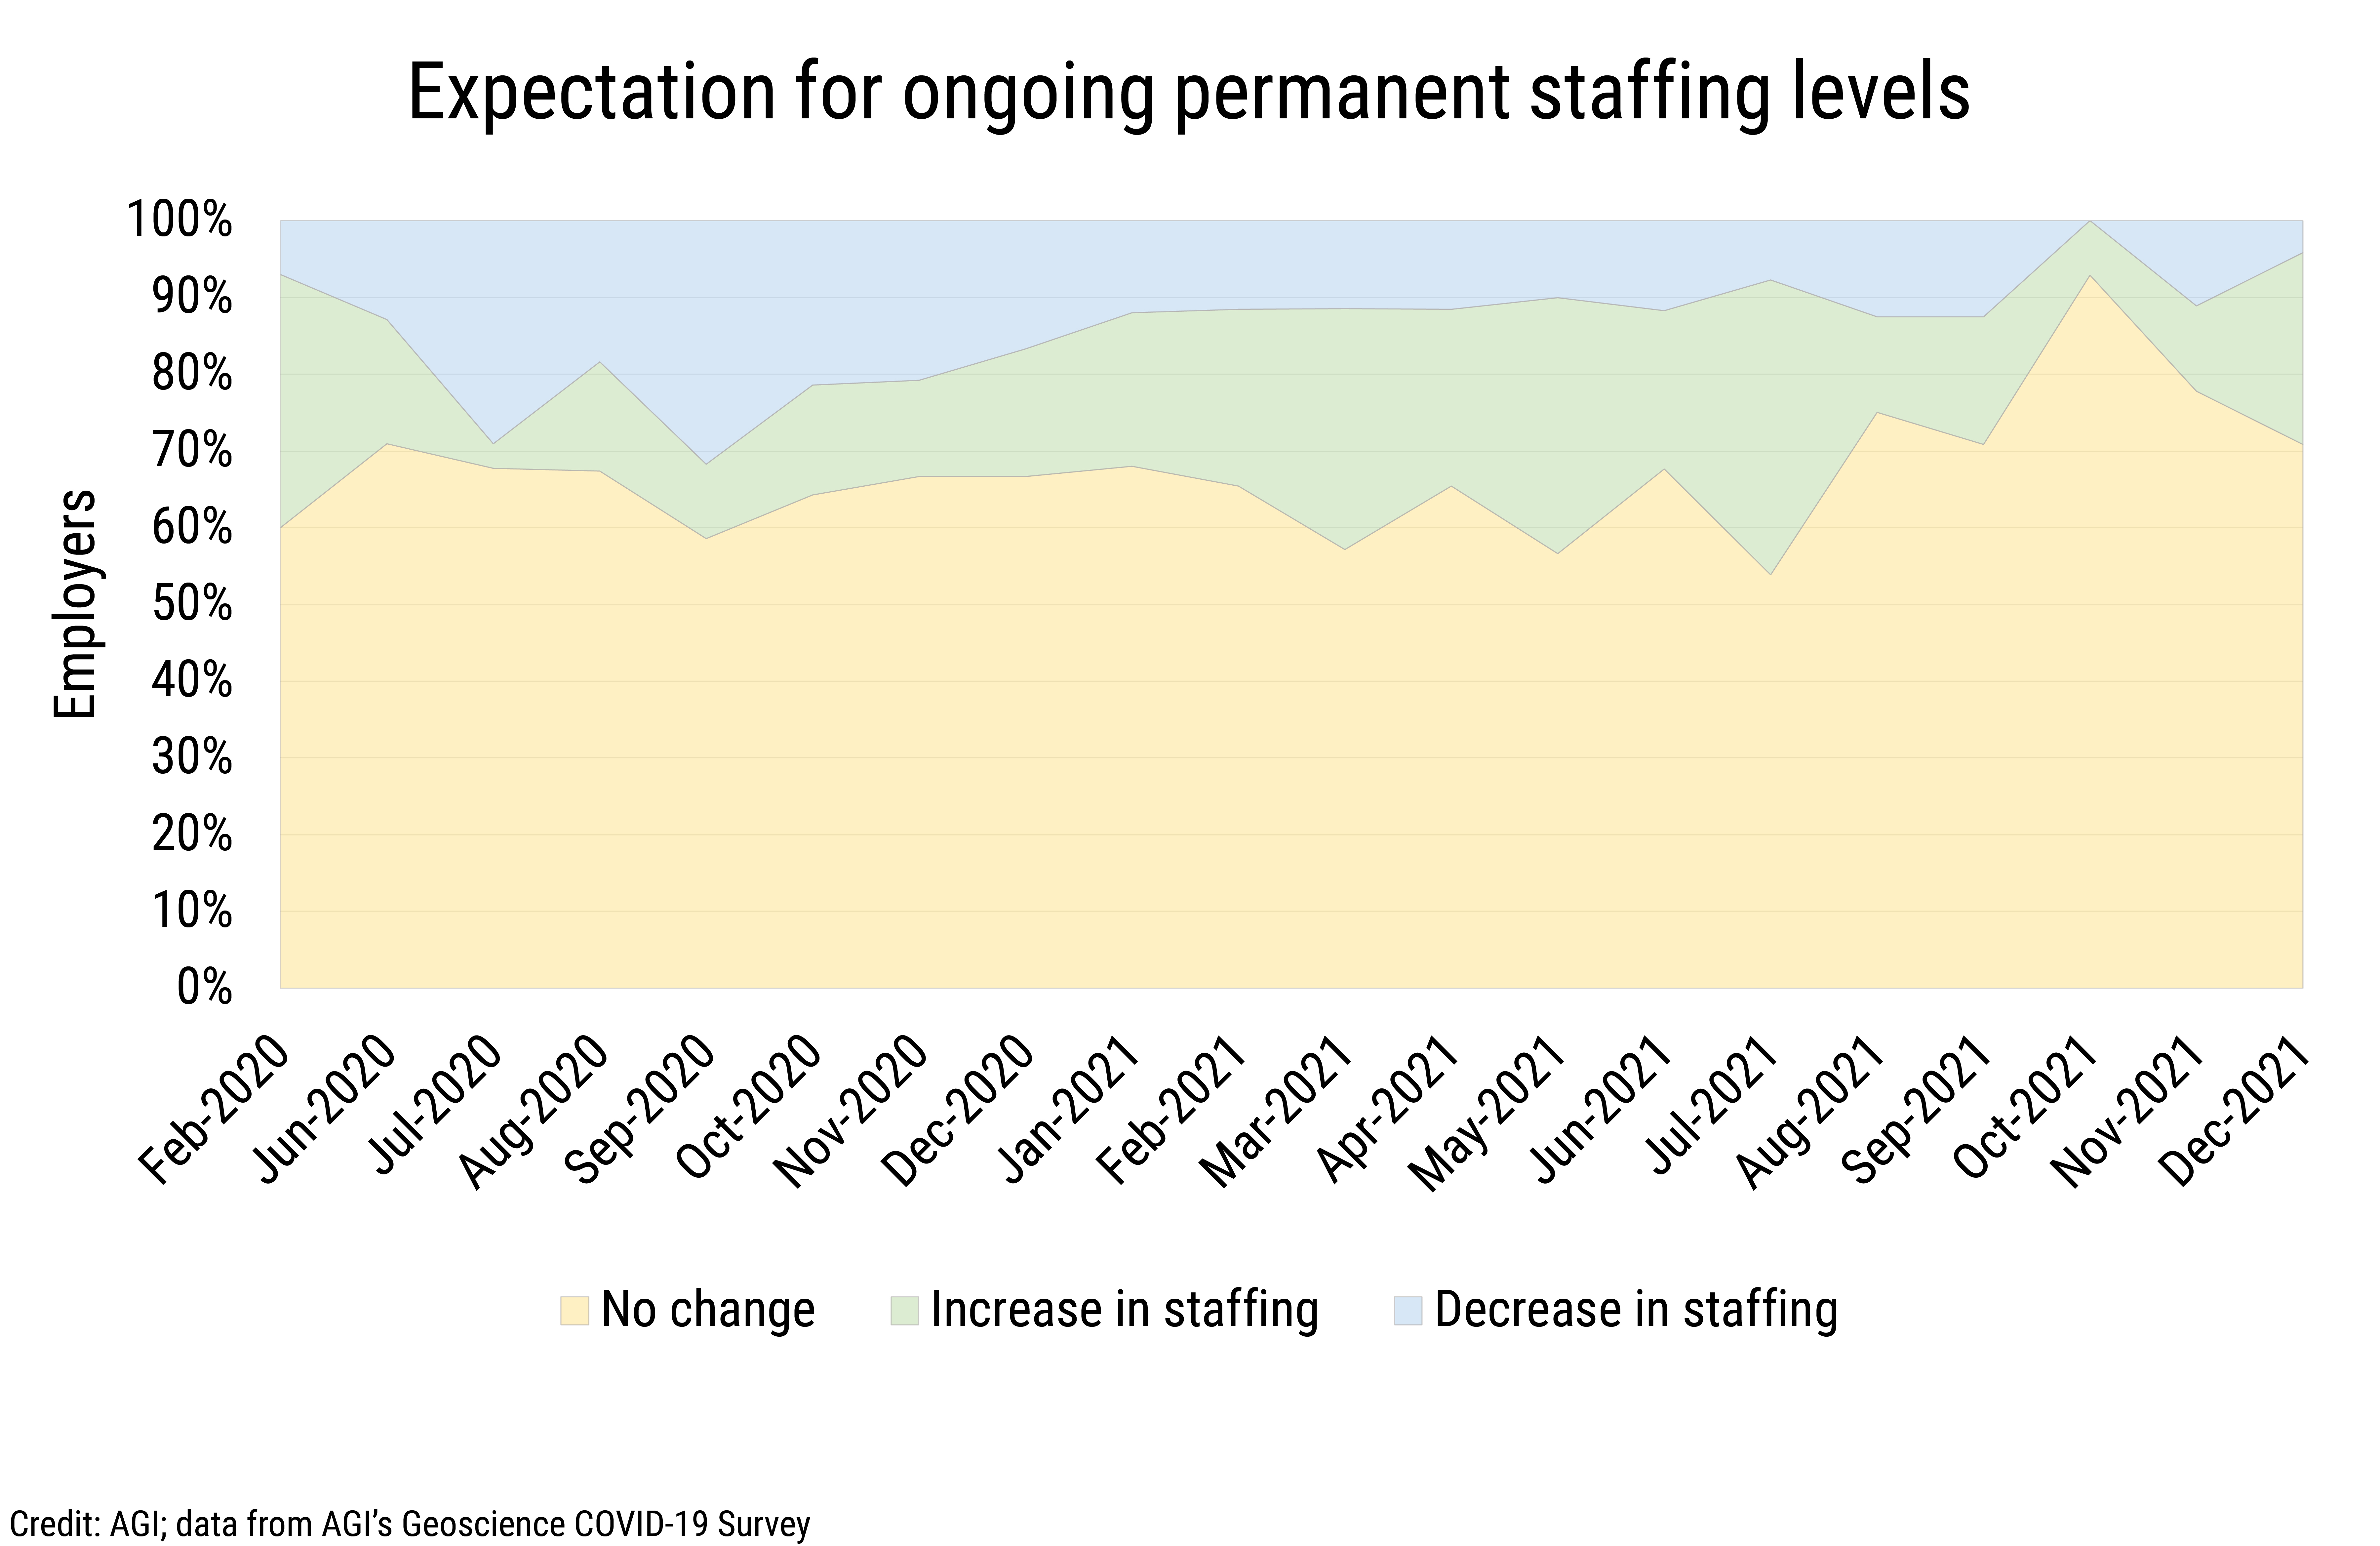 DB_2022-003 chart 01: Expectation for ongoing permanent staffing levels (Credit: AGI; data from AGI&#039;s Geoscience COVID-19 Survey)